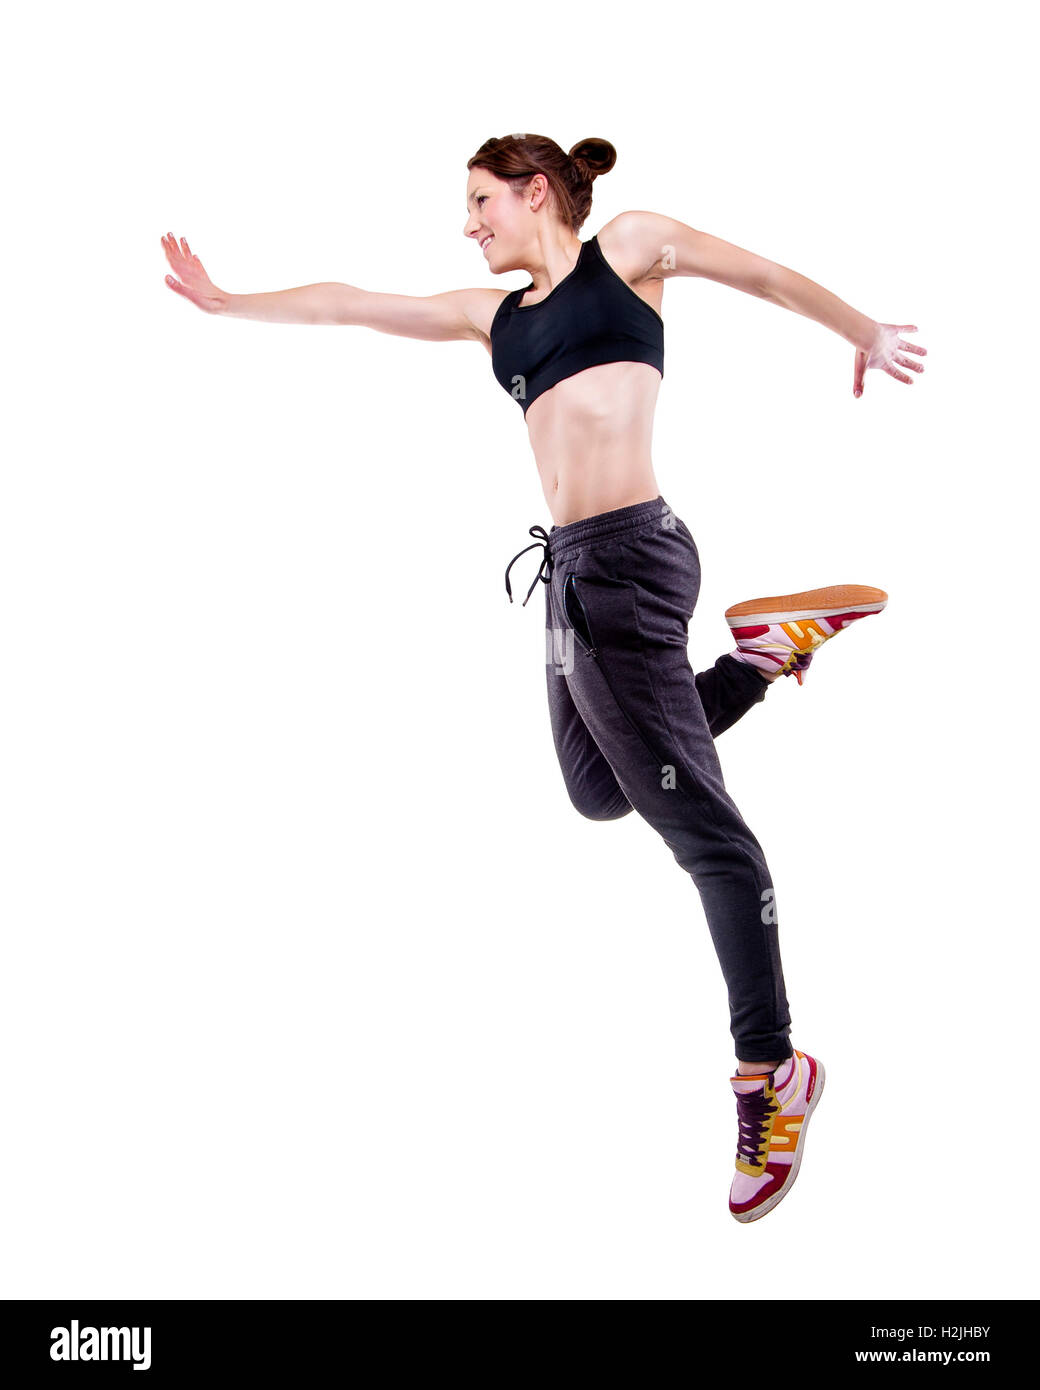 modern style dancer dence in air on studio background Stock Photo